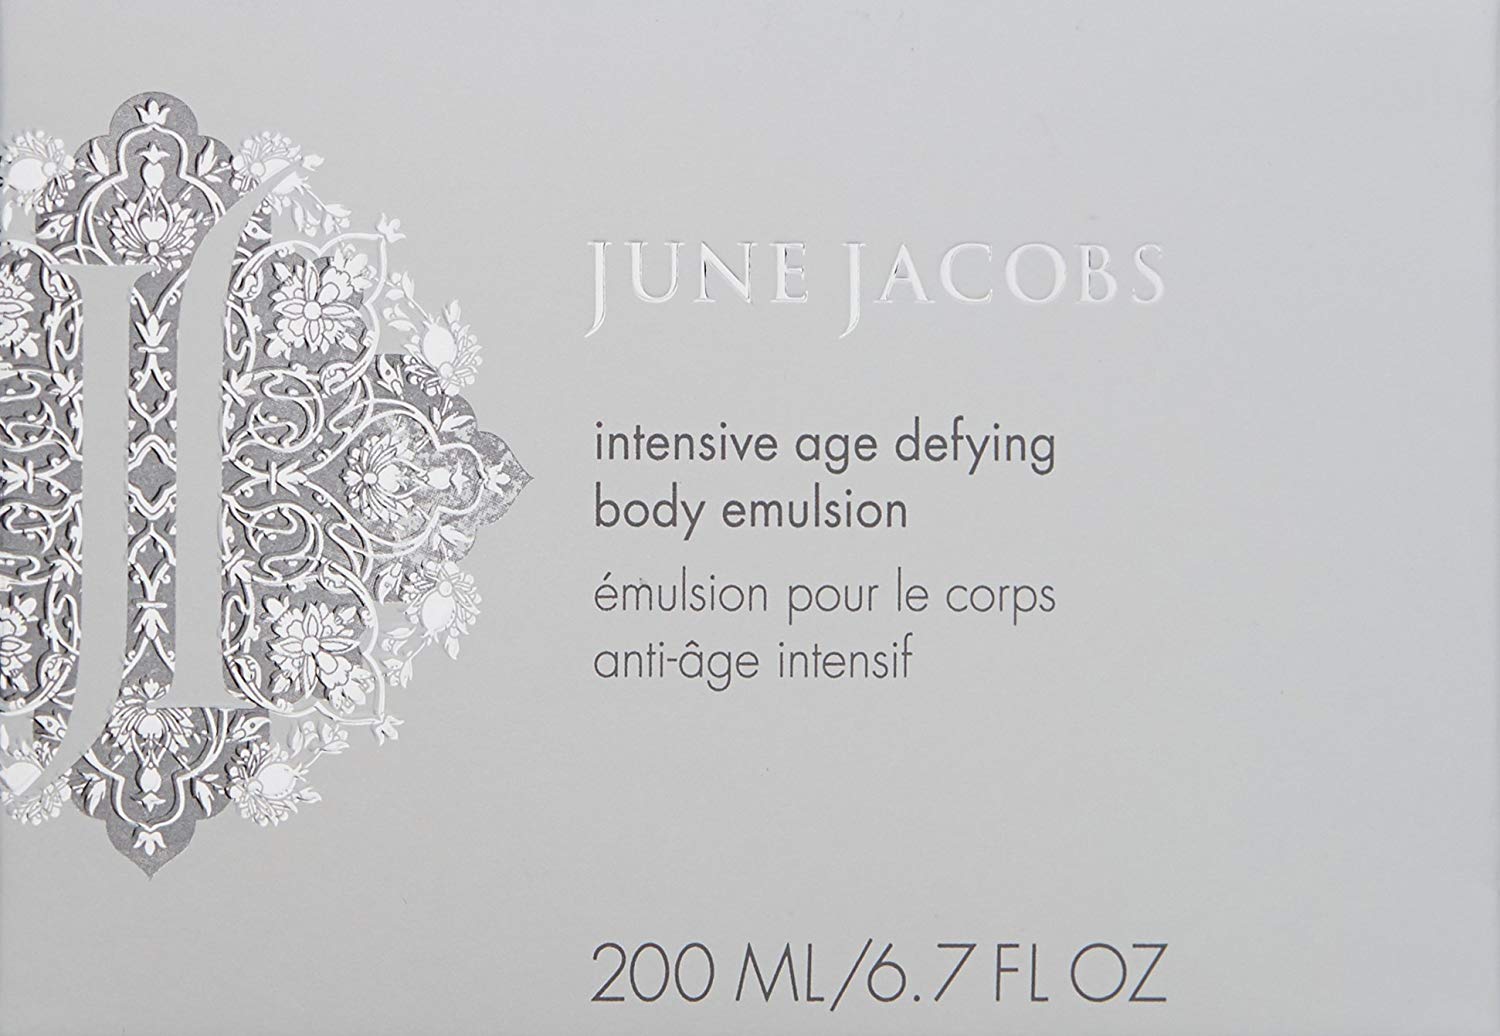 June Jacobs Intensive Age Defying Body Emulsion  6.7oz/200ml New With Box - image 1 of 2